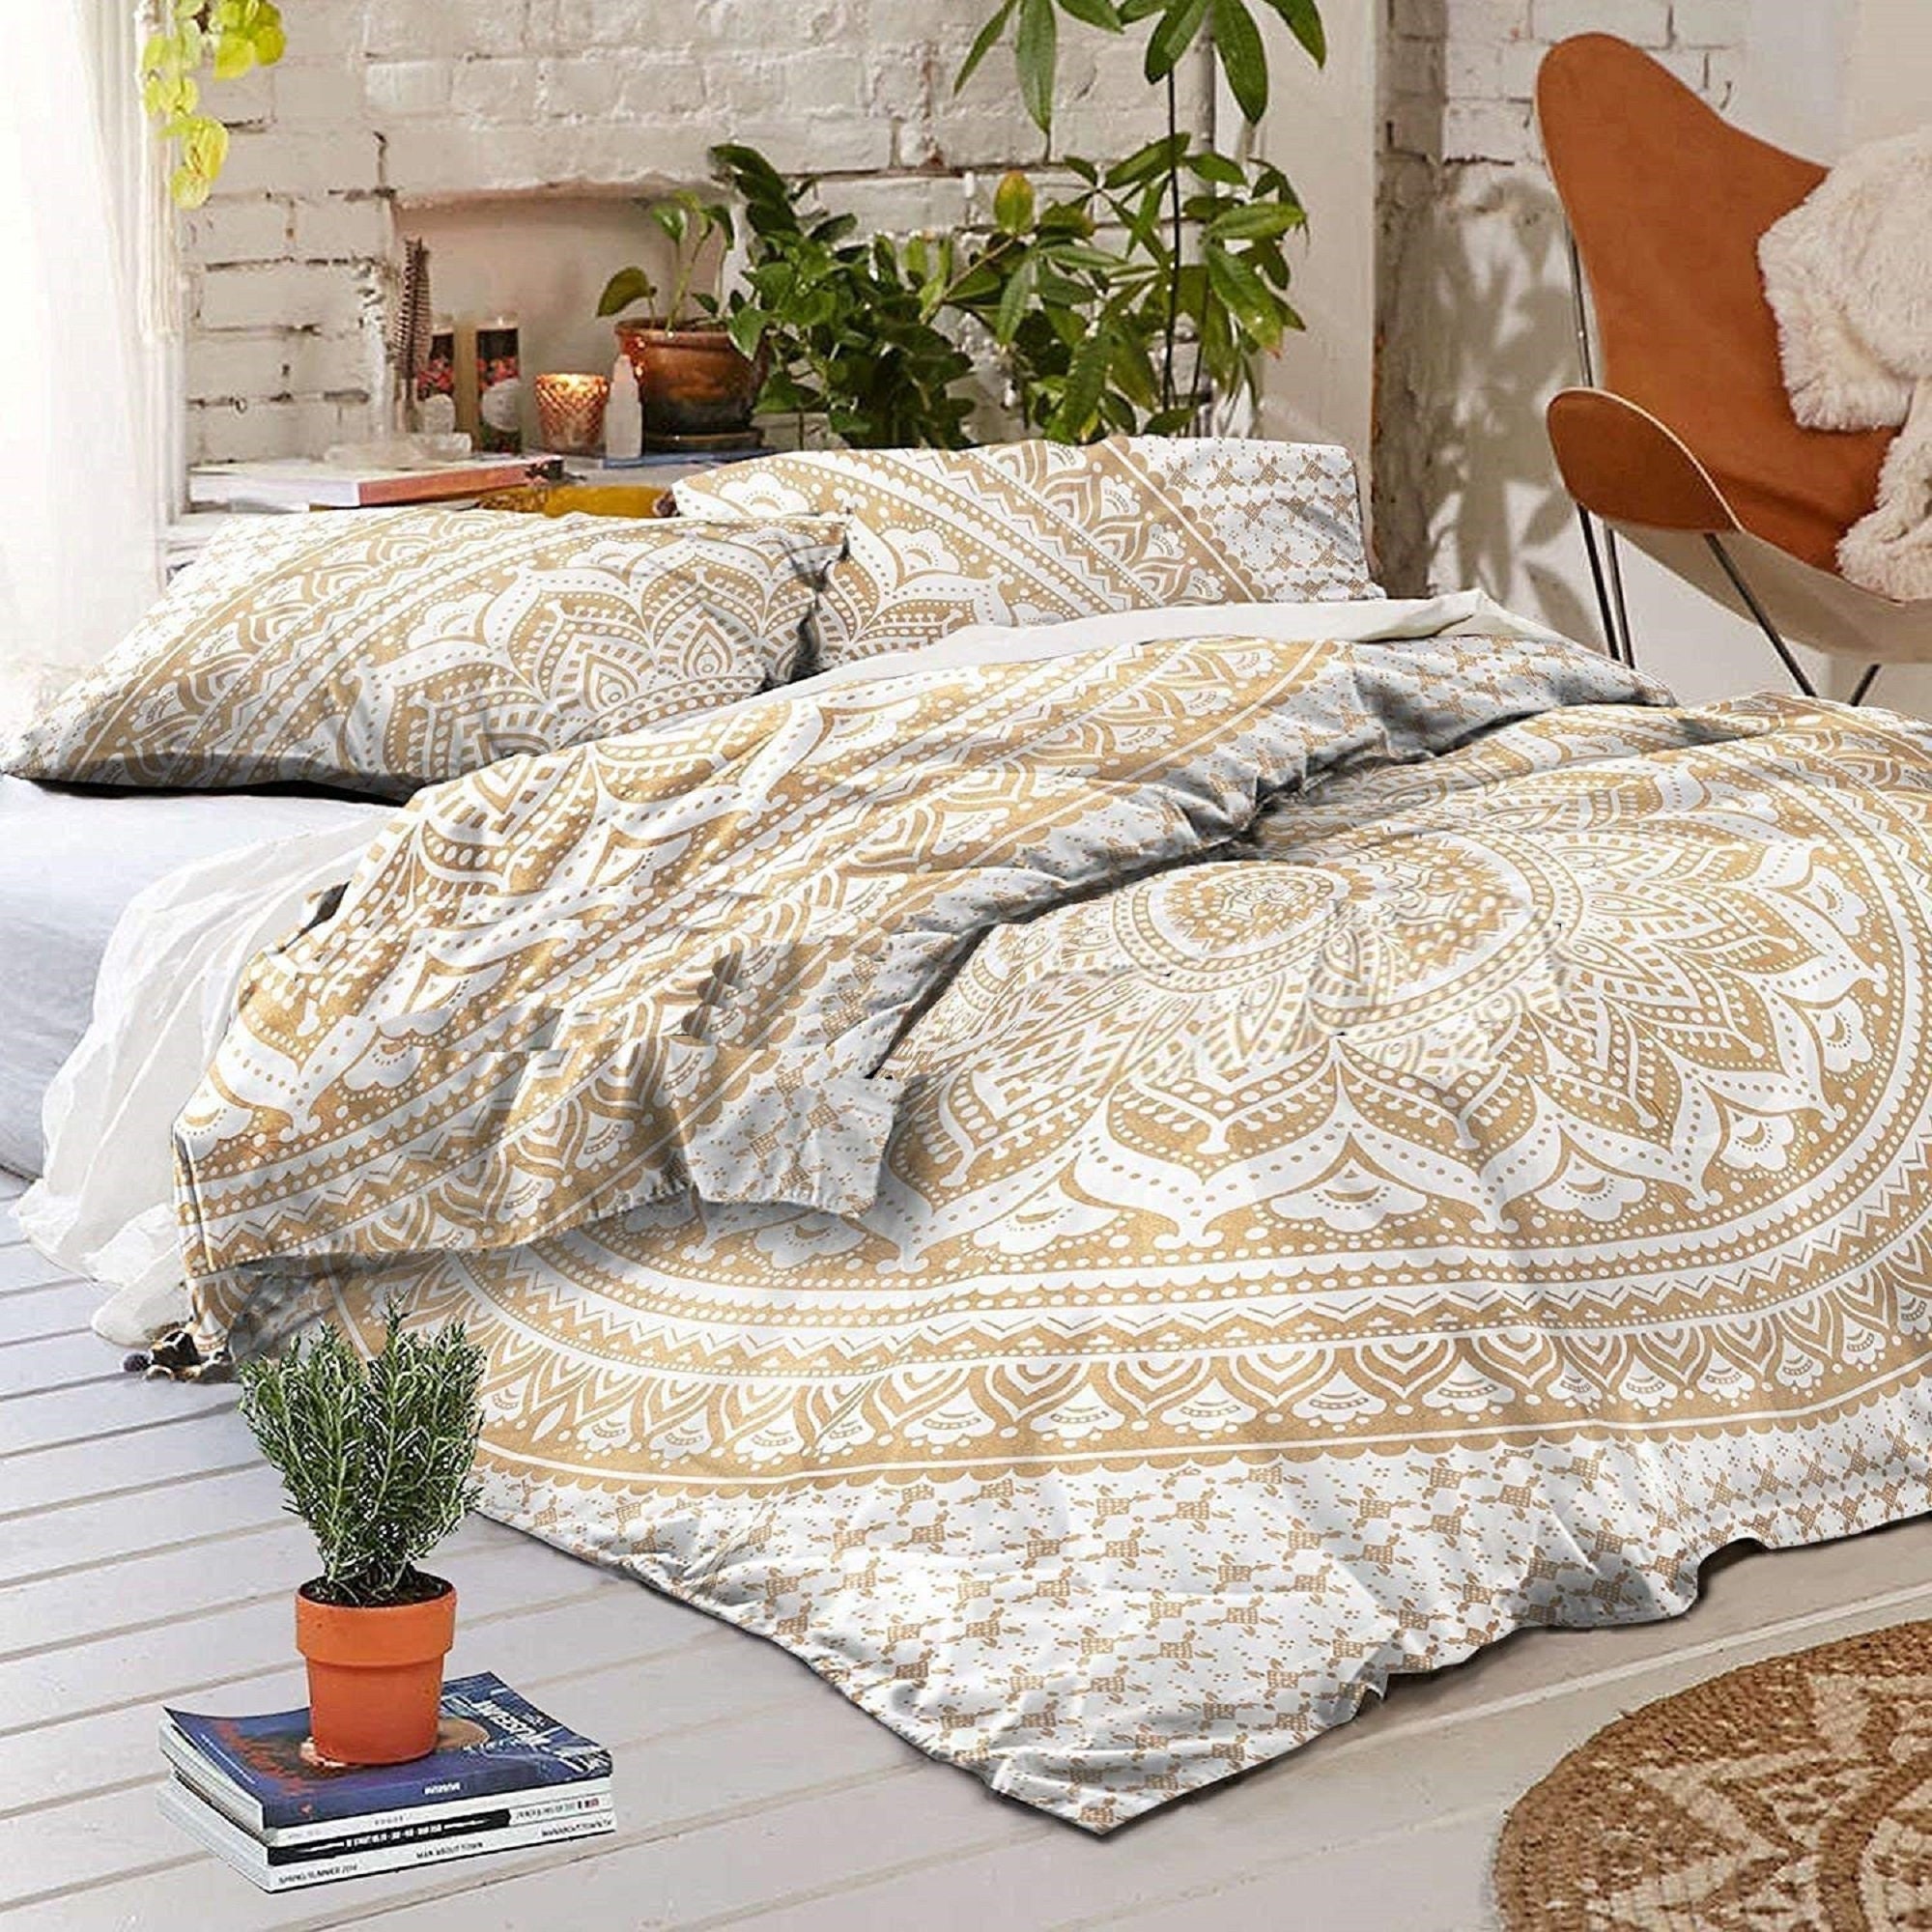 Mandala Indian Duvet Cover With 2 Pillow Quilt Cover Bohemian Comforter Bedding 